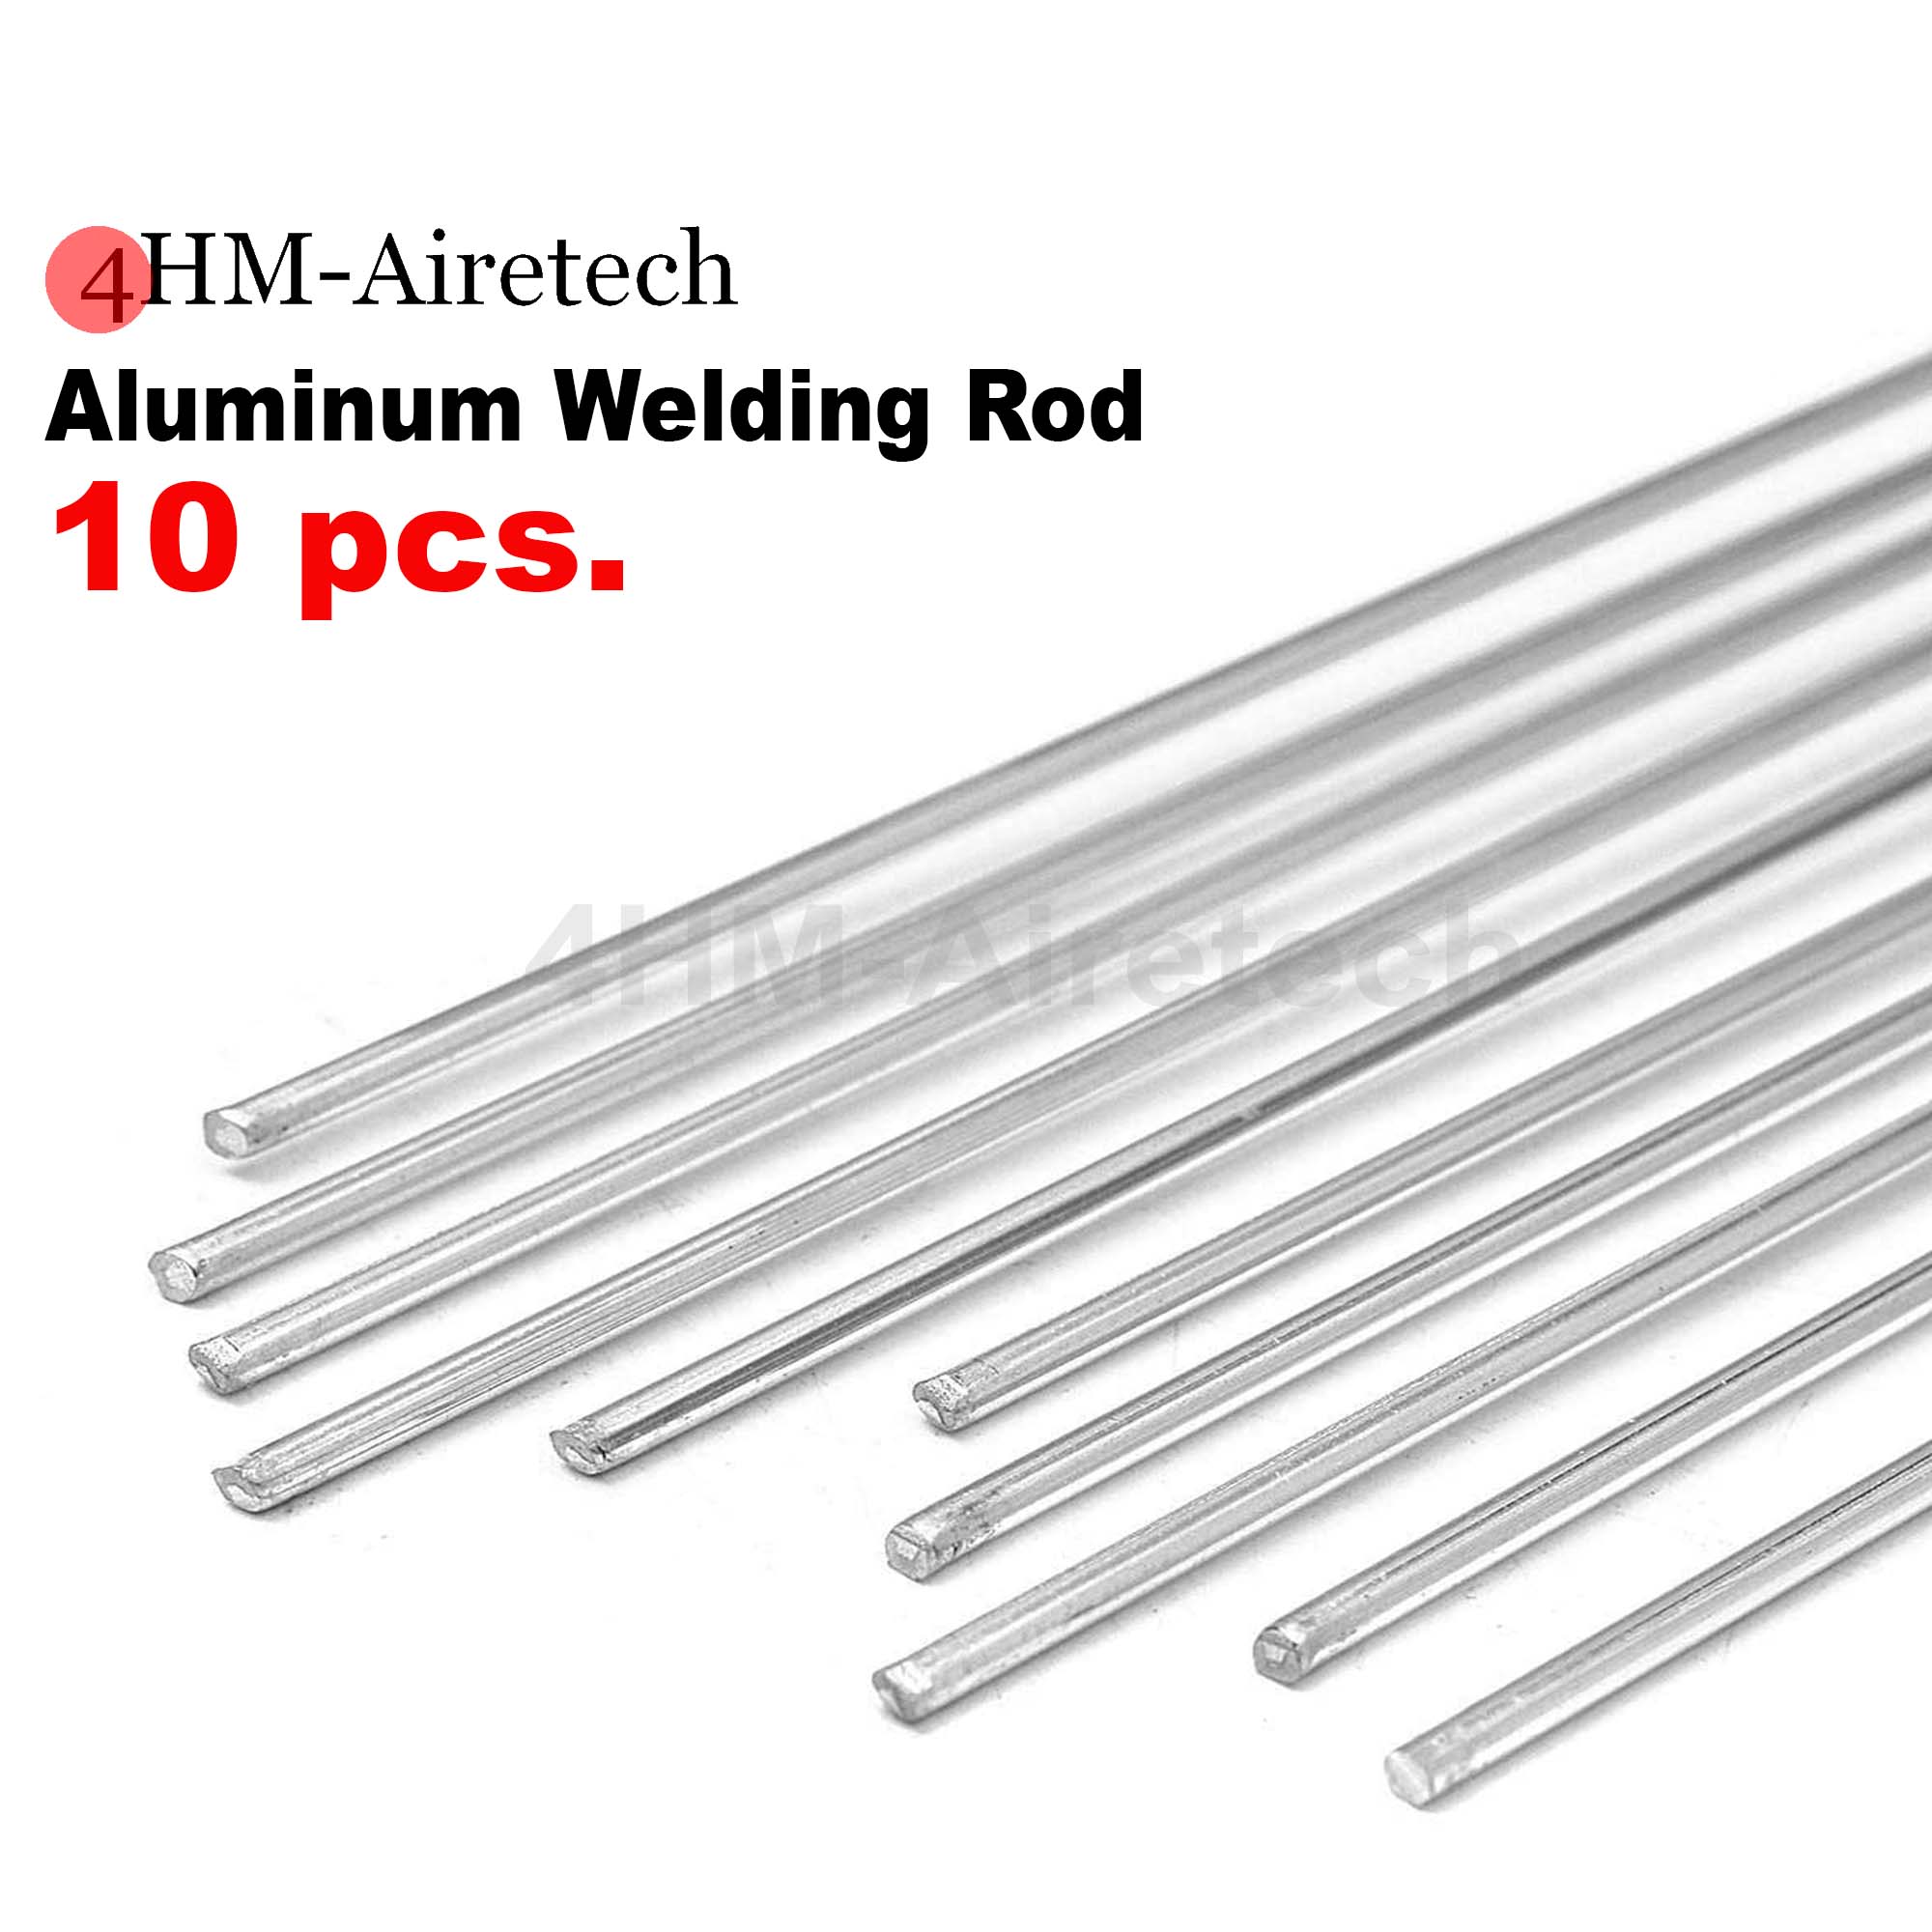 10pcs Aluminum Alloy Rods Silver Welding Brazing Rod 1.6x330mm For Repair Too… 